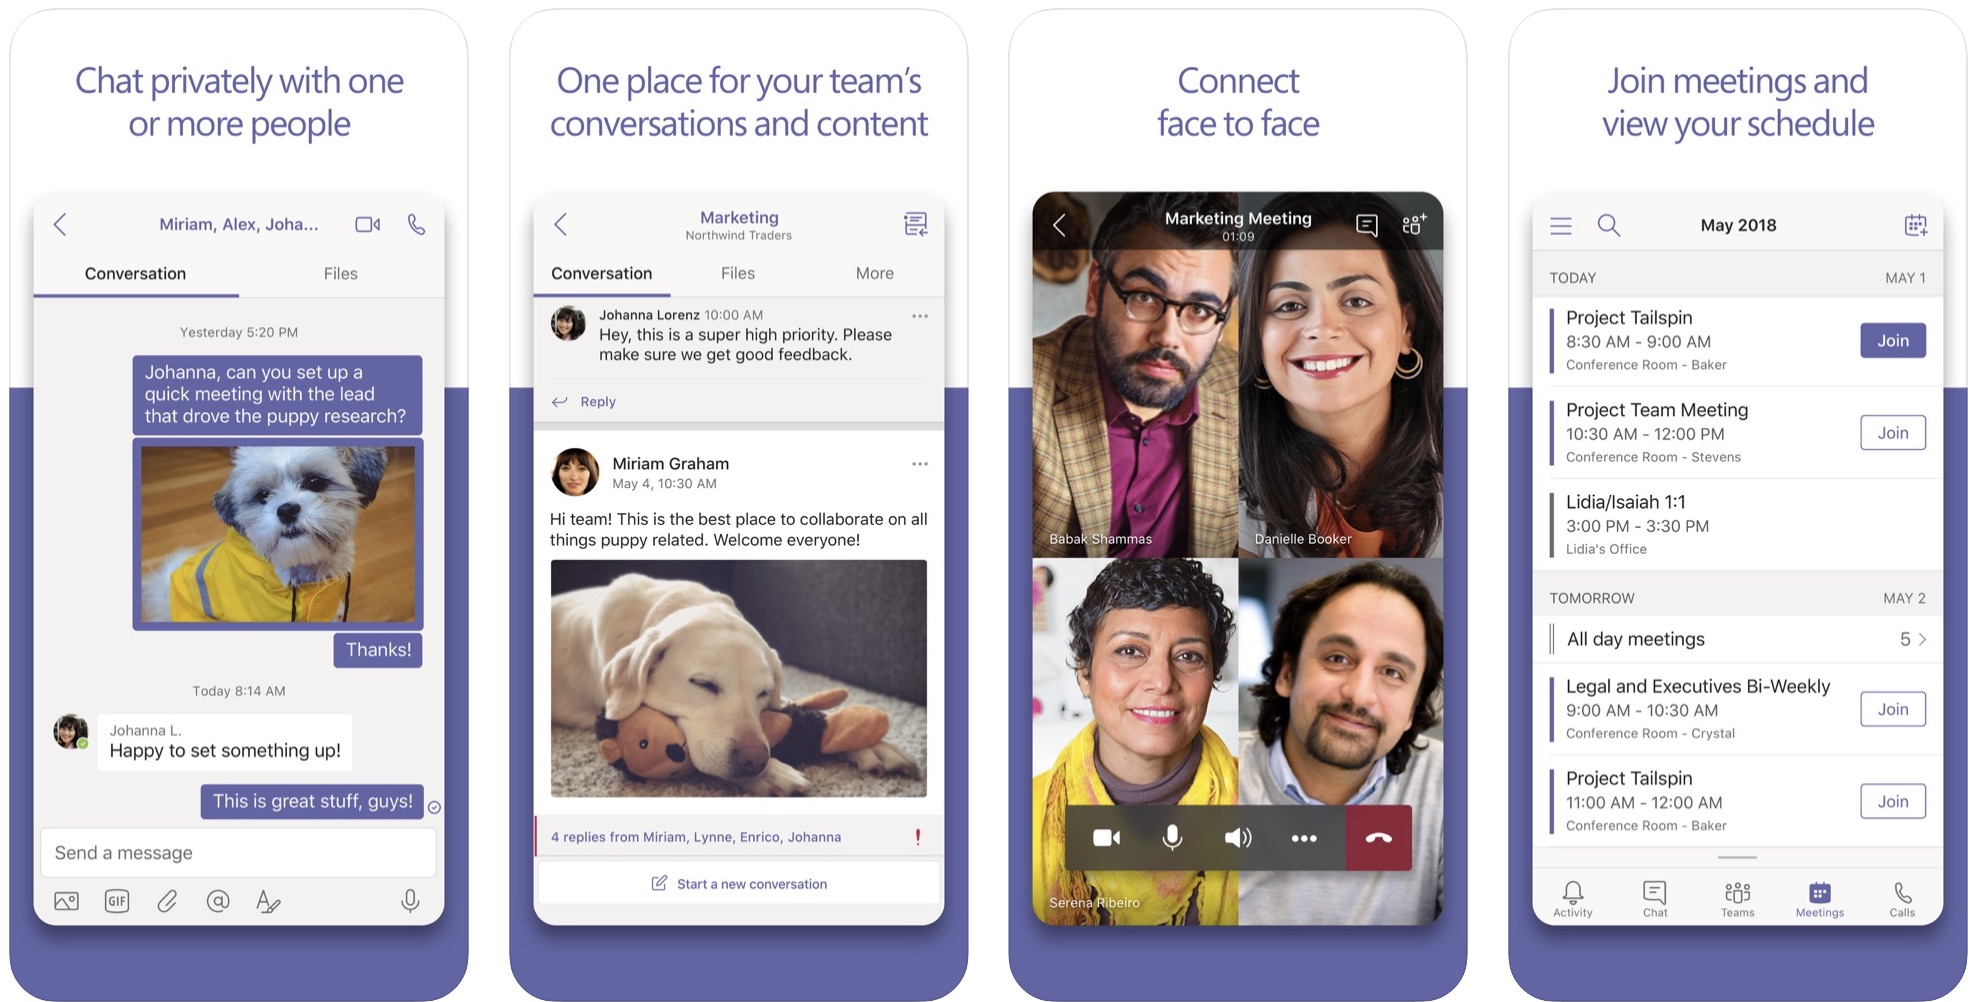 Zoom alternatives video call apps Skype and Microsoft Teams